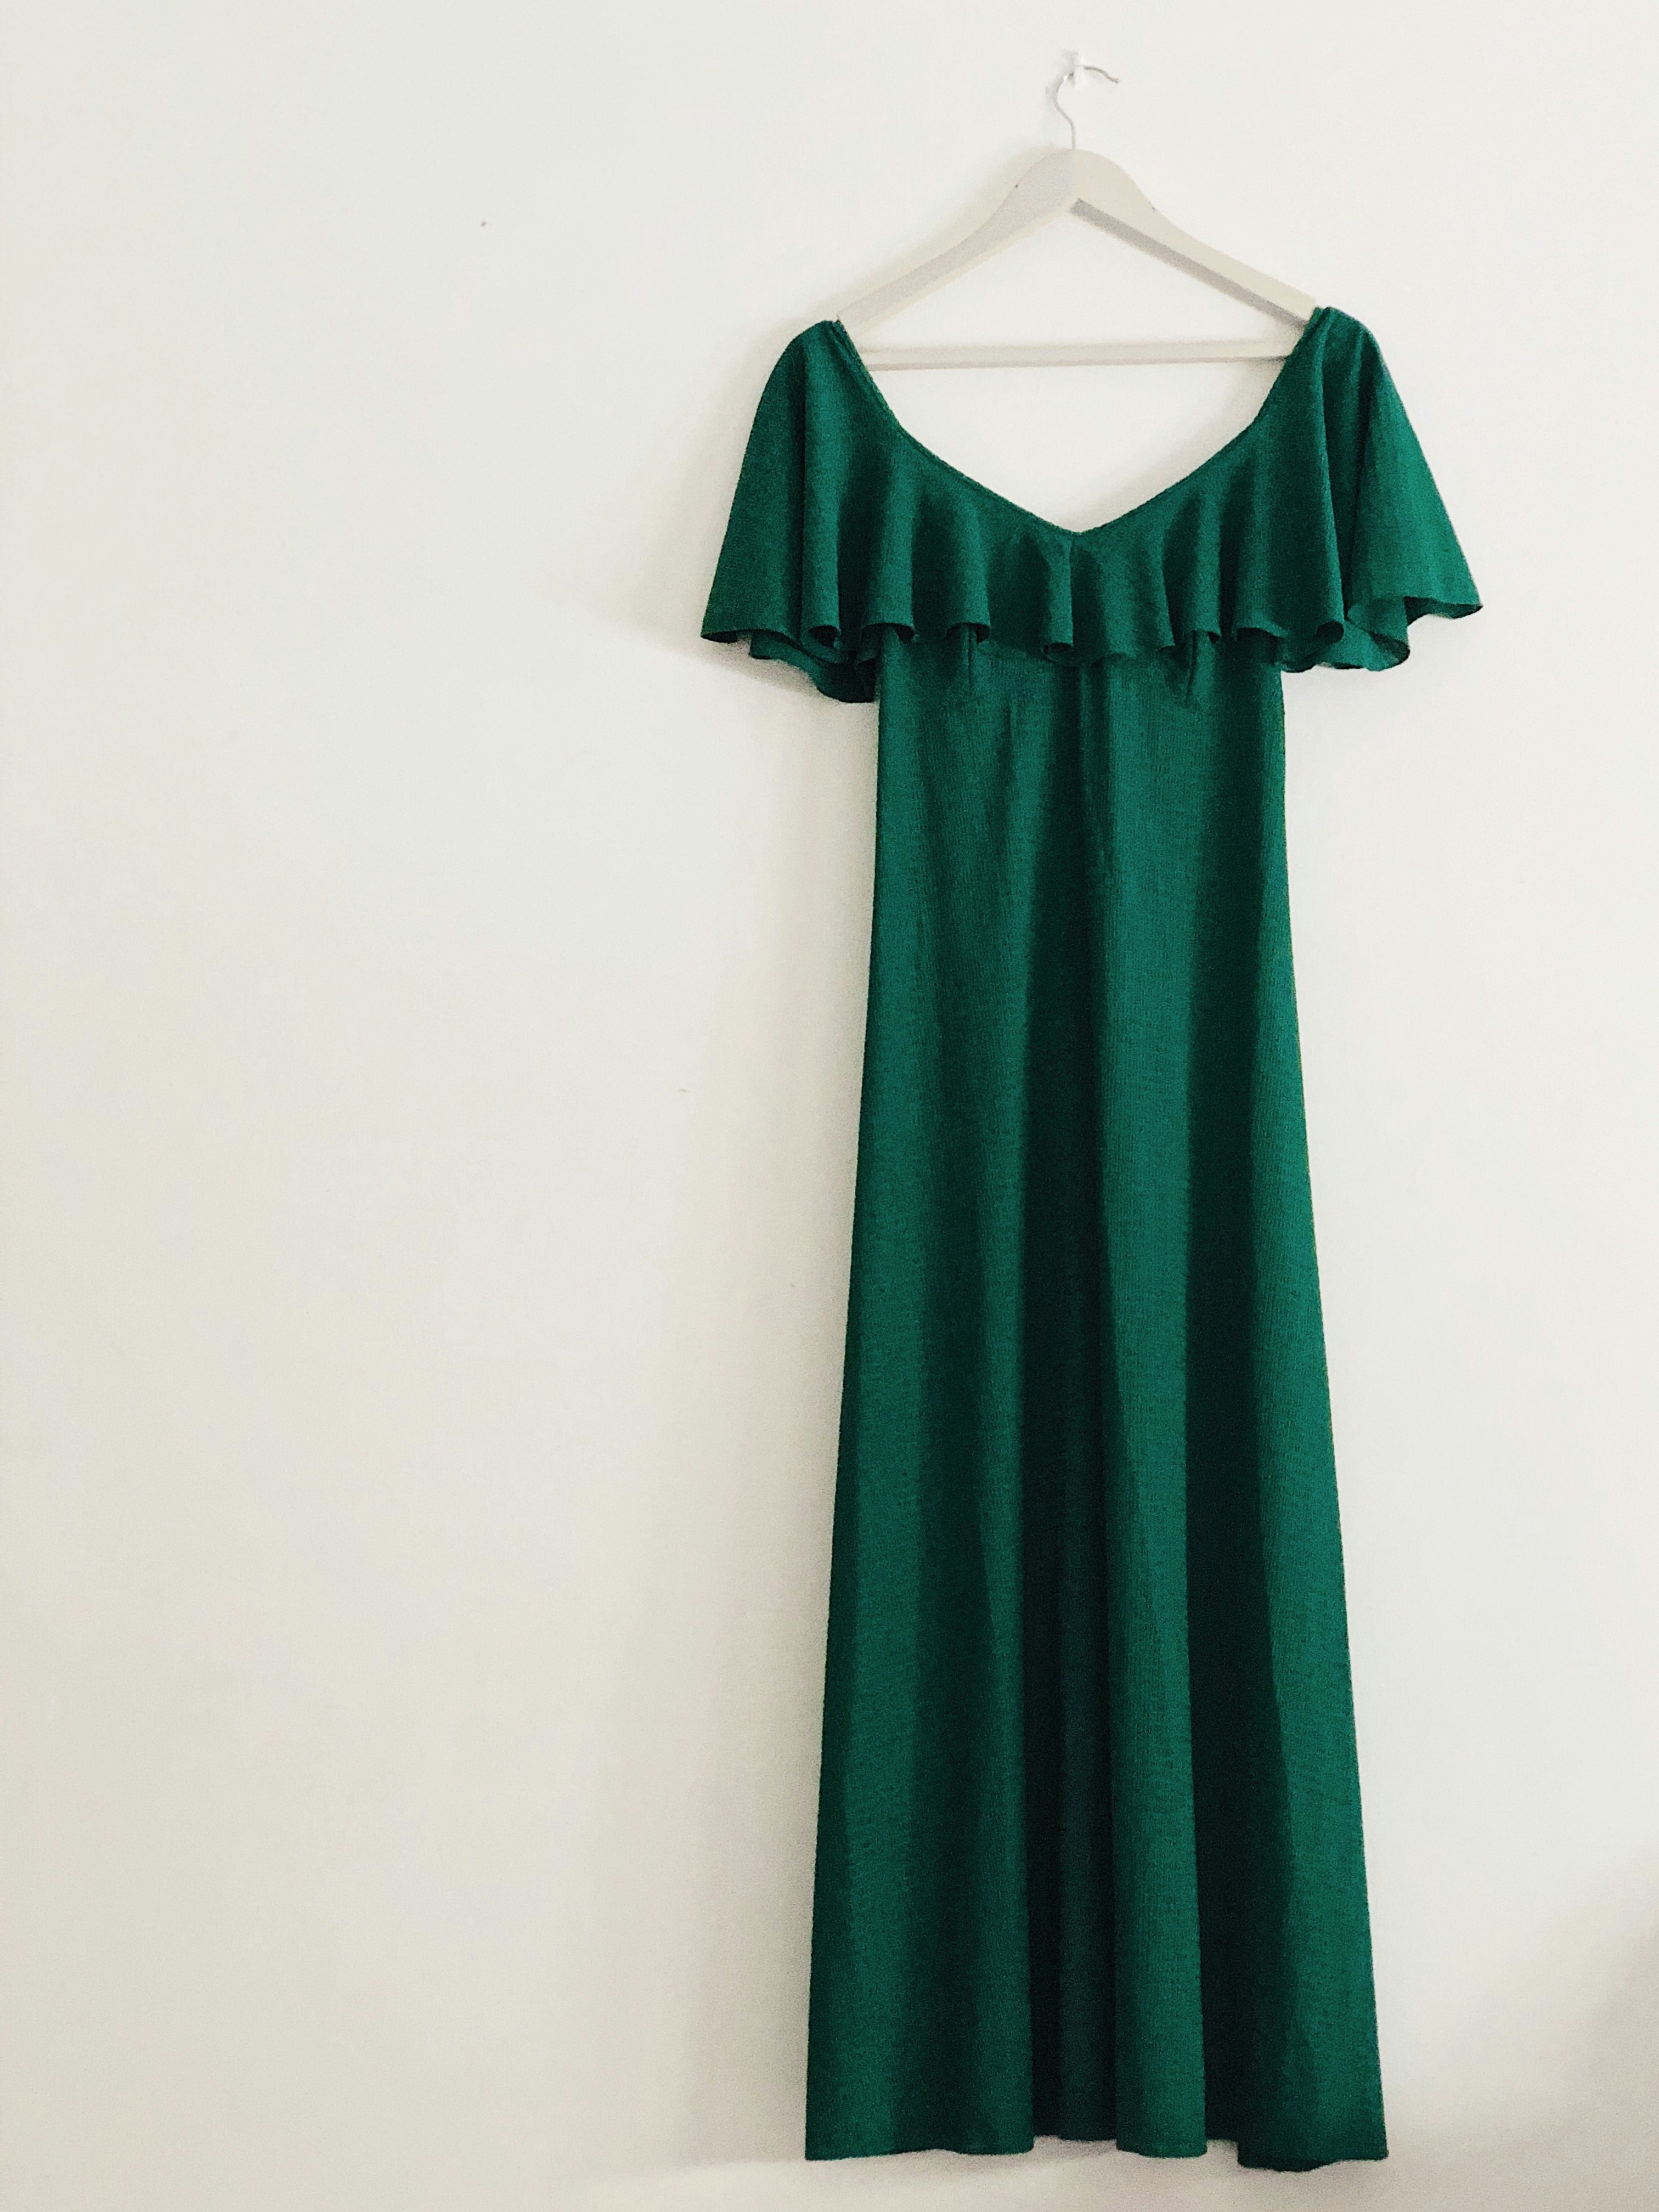 A beautiful long green dress on a hanger on a white wall 